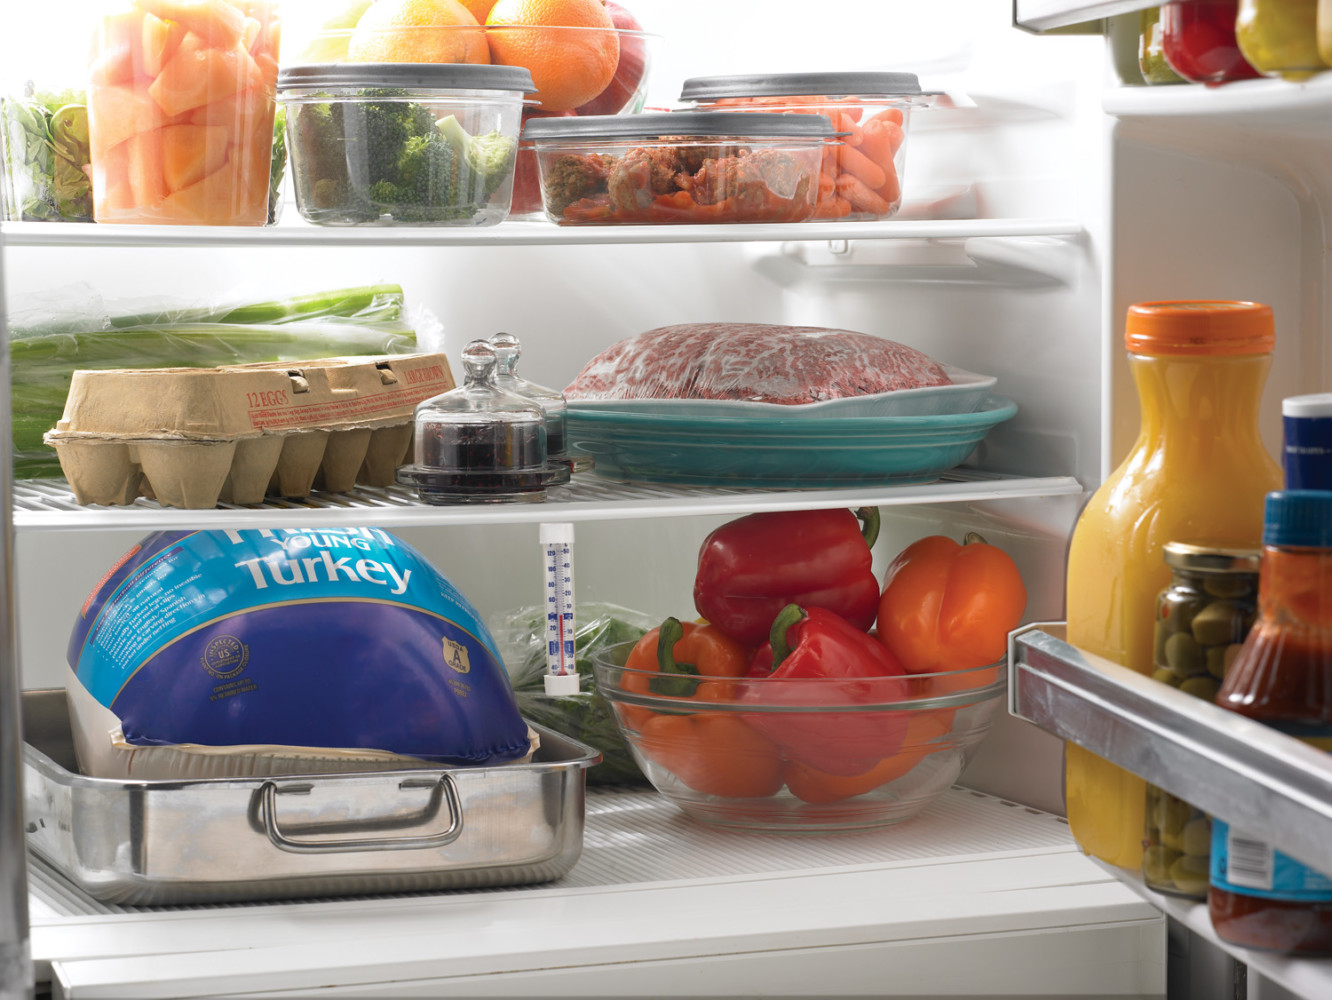 Food that is in refrigerators should be safe as long as the power is not out for more than four hours.